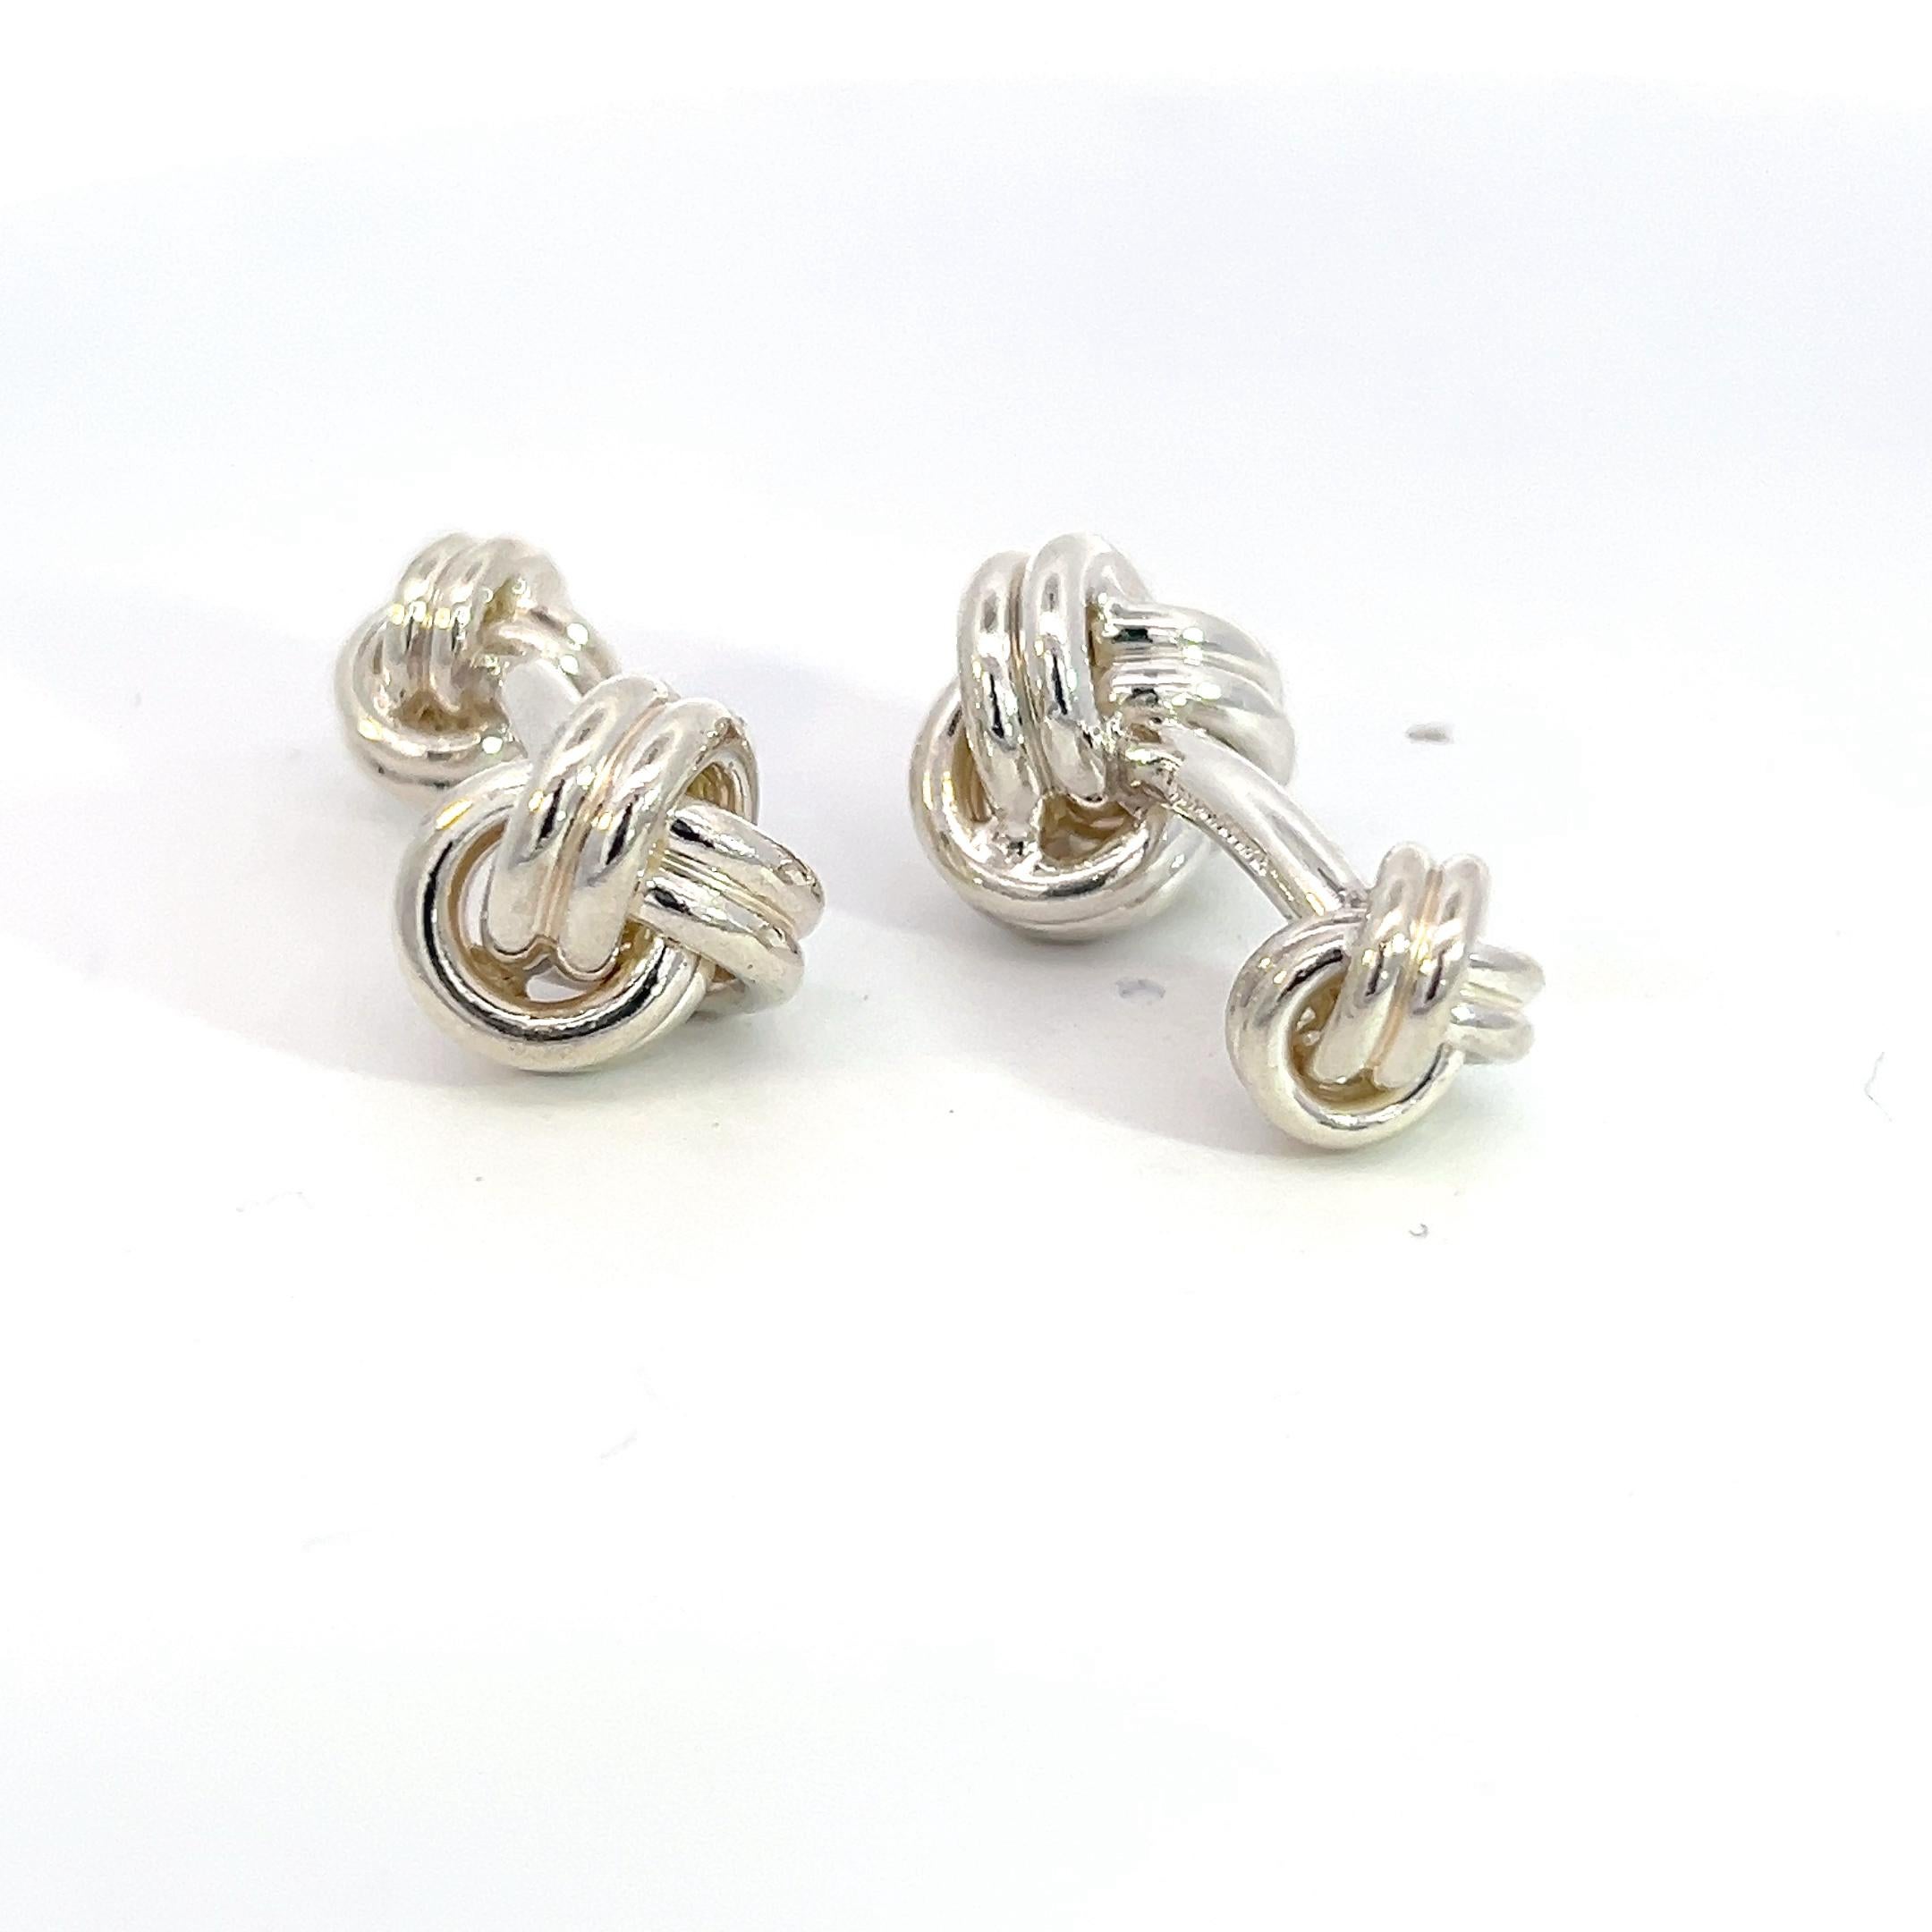 Tiffany & Co Estate Love Knot Cufflinks Sterling Silver TIF527

TRUSTED SELLER SINCE 2002

PLEASE SEE OUR HUNDREDS OF POSITIVE FEEDBACKS FROM OUR CLIENTS!!

FREE SHIPPING

DETAILS
Style: Love Knot Cufflinks
Metal: Sterling Silver
Weight: 18.9